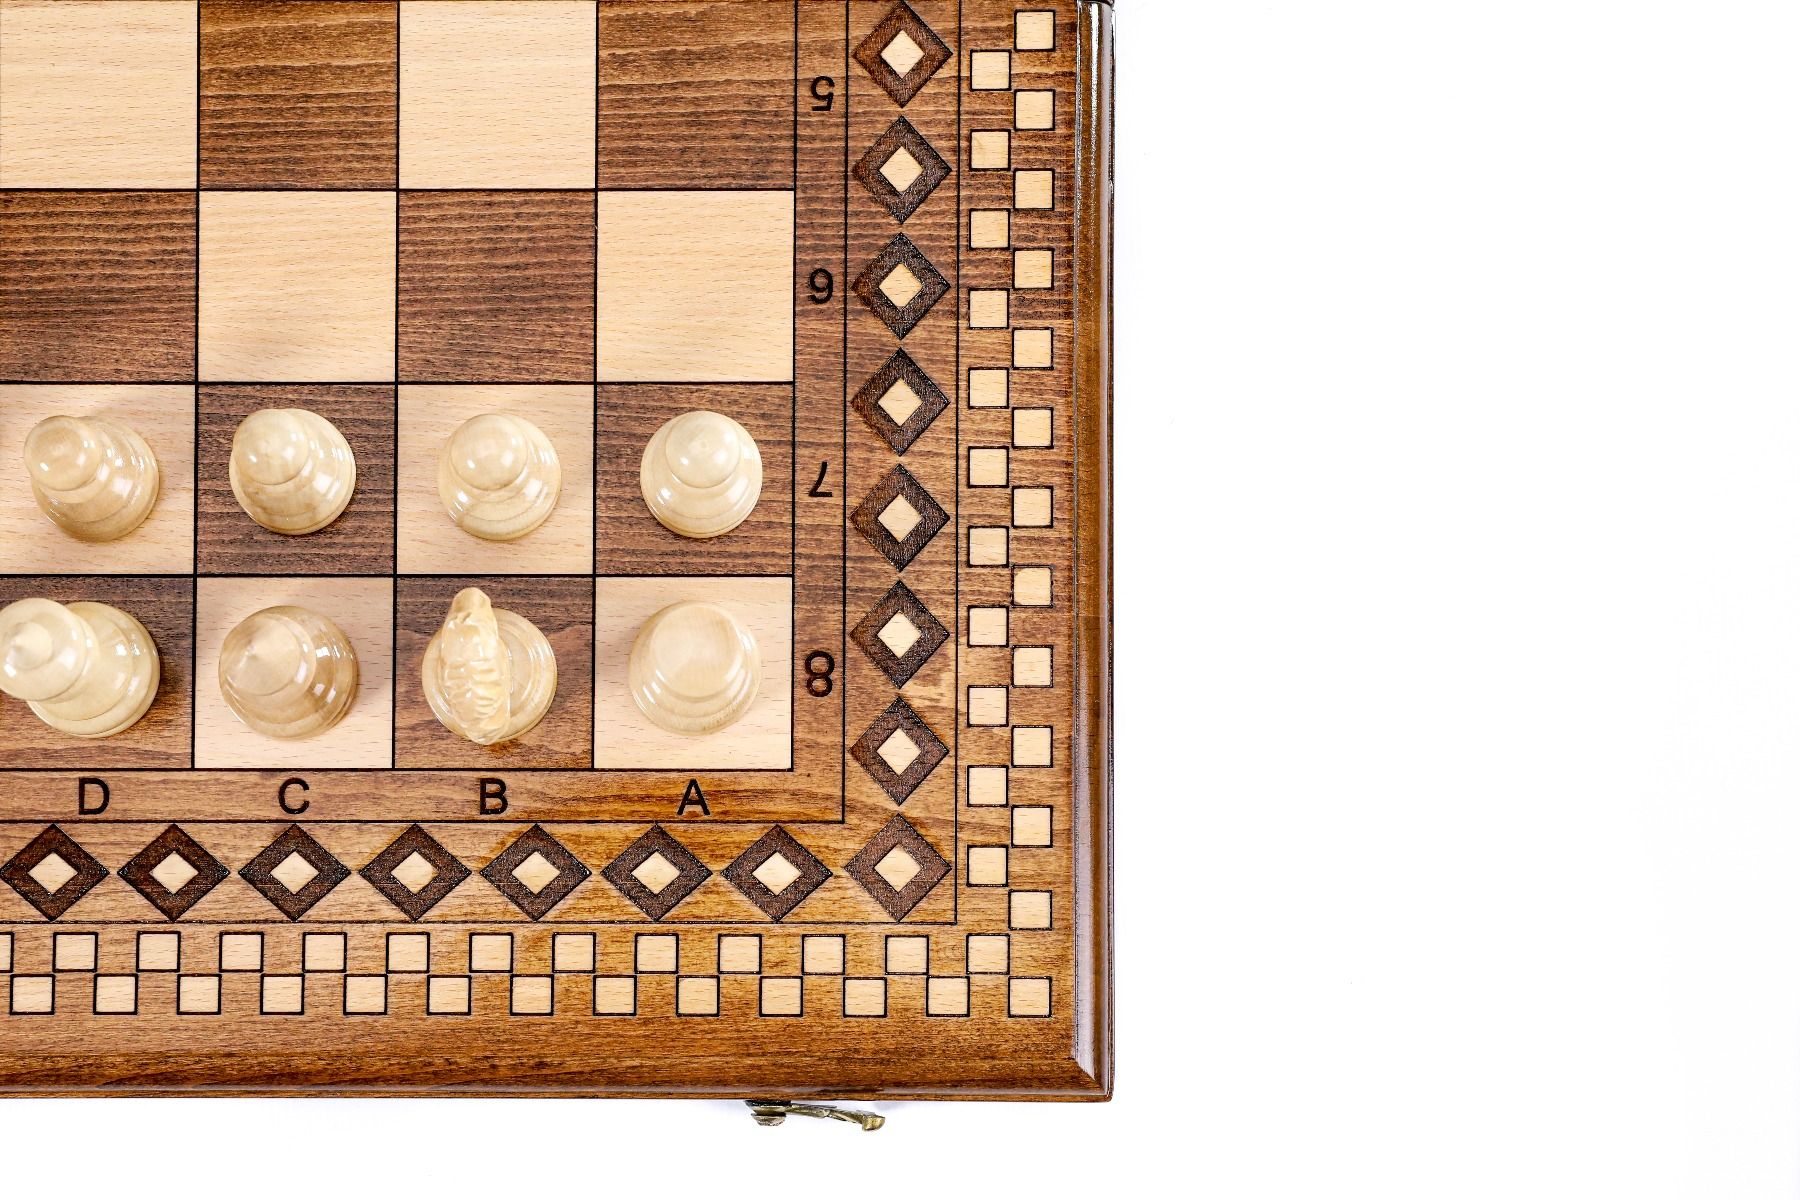 Command the board in style with a chess set that showcases the grandeur of Armenian carpet patterns through exquisite handcrafted detail.